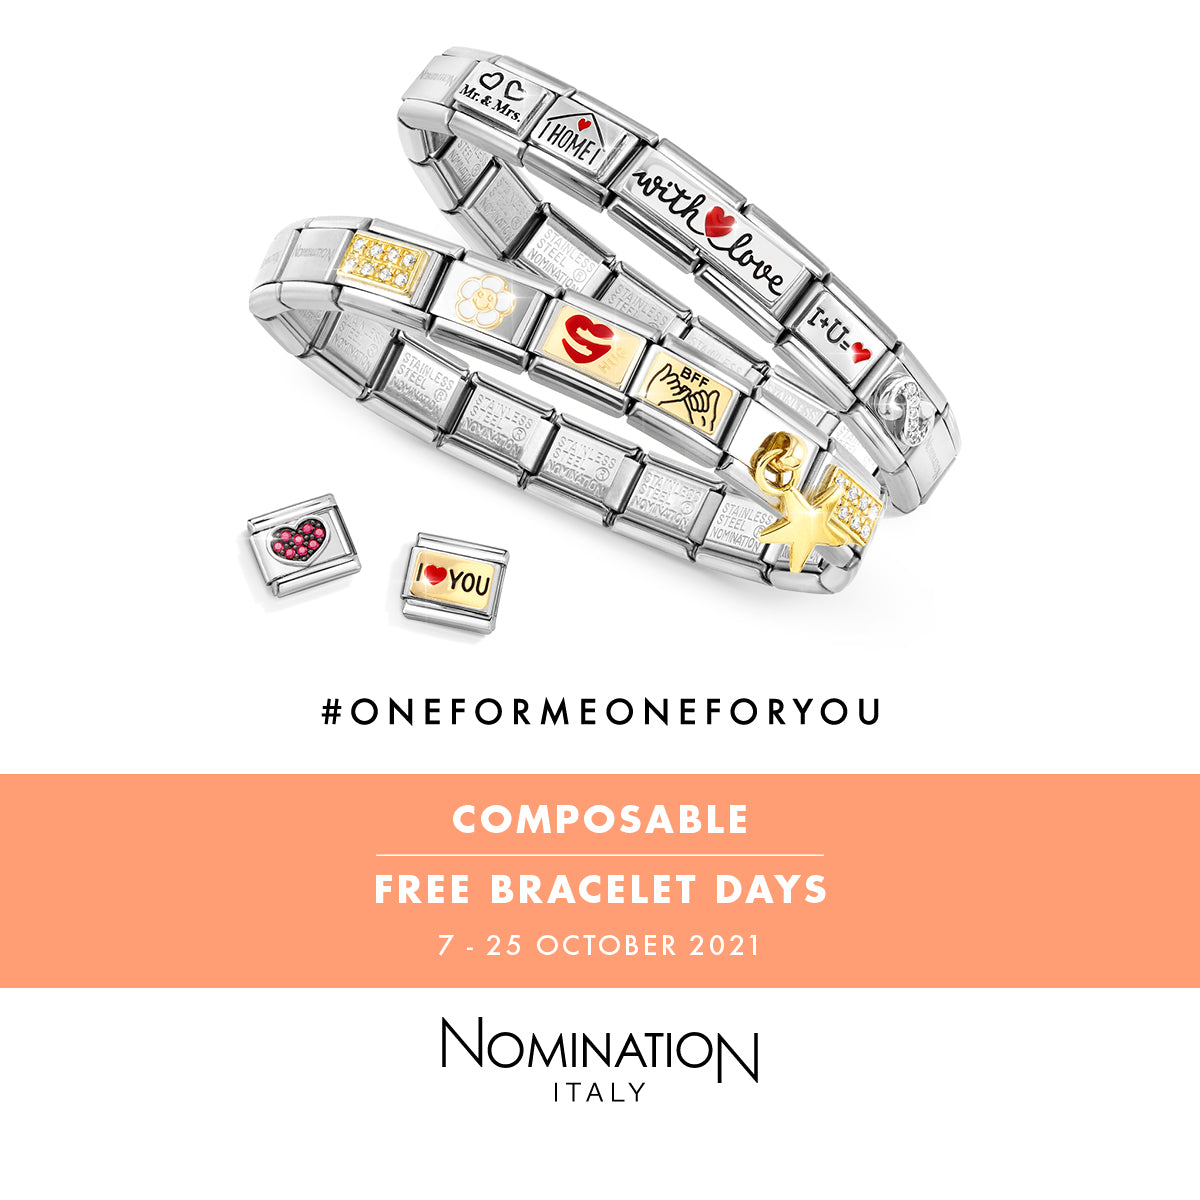 Buy 2 Nomination Charms & Get the rest of the Bracelet FREE*